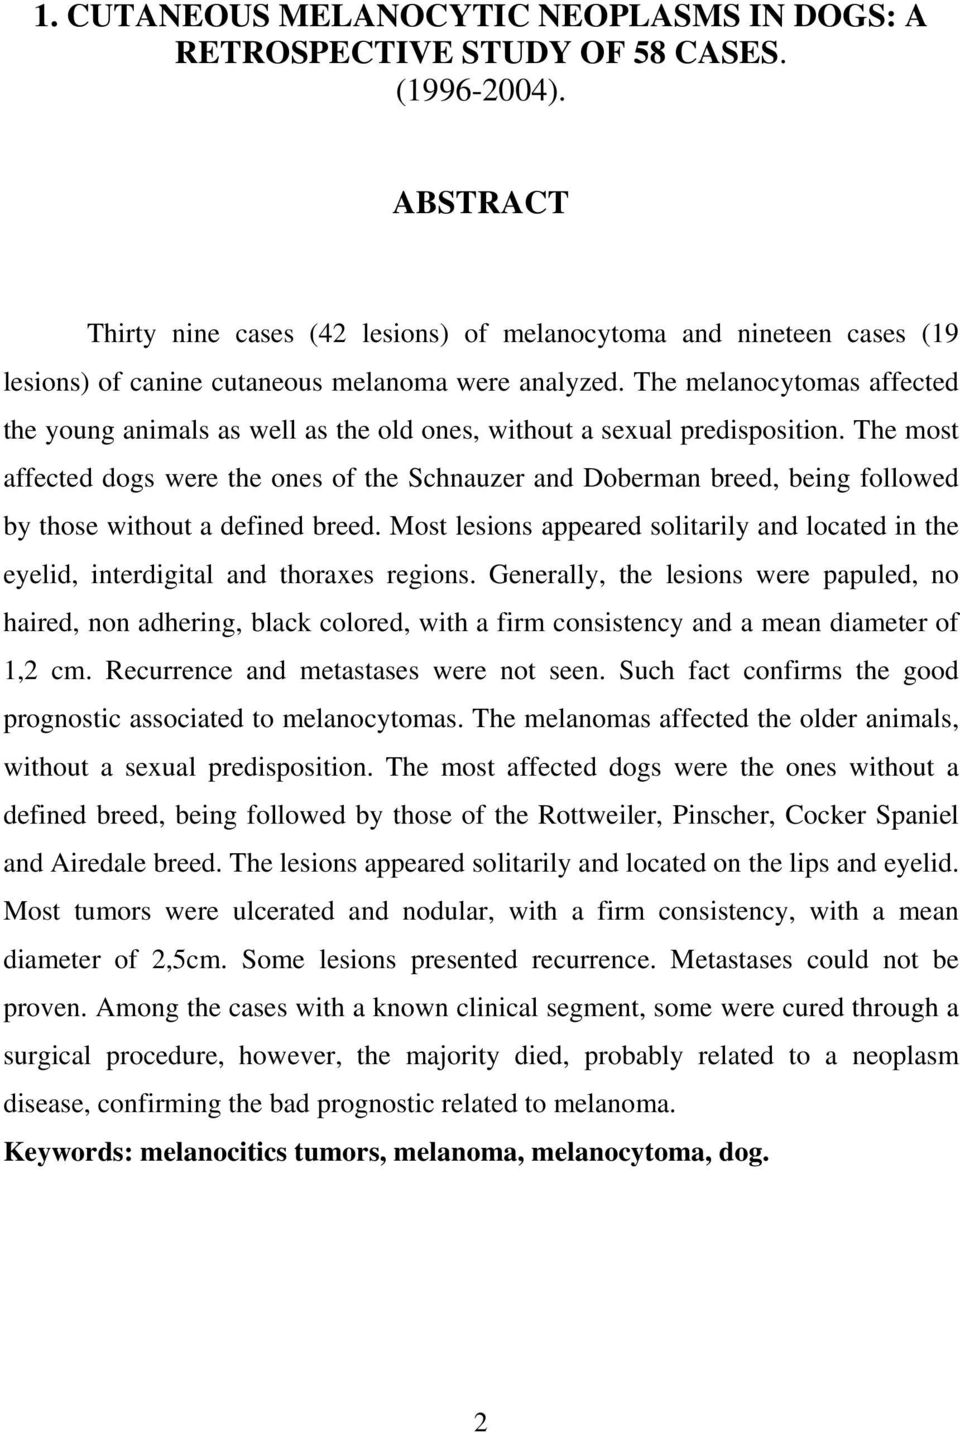 The melanocytomas affected the young animals as well as the old ones, without a sexual predisposition.